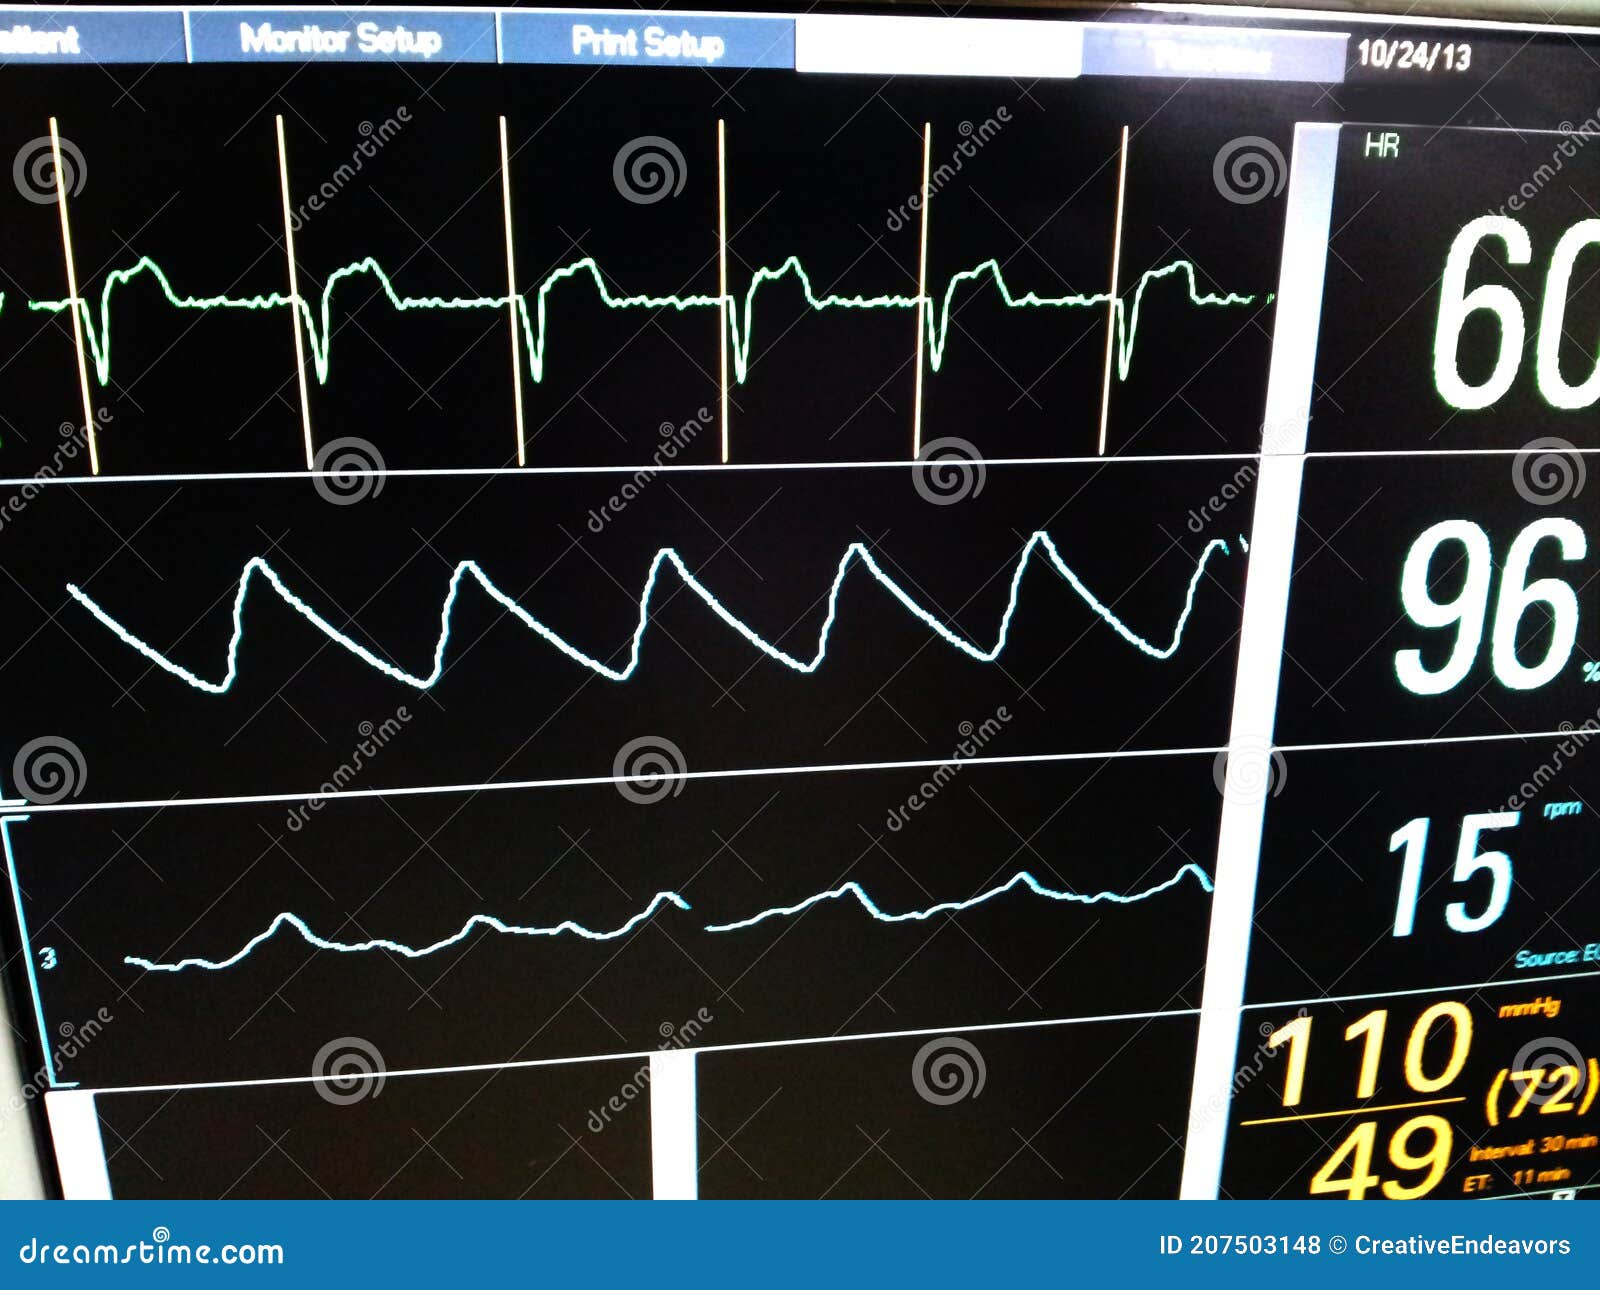 icu monitor screen showing pacemaker spikes on top tracing